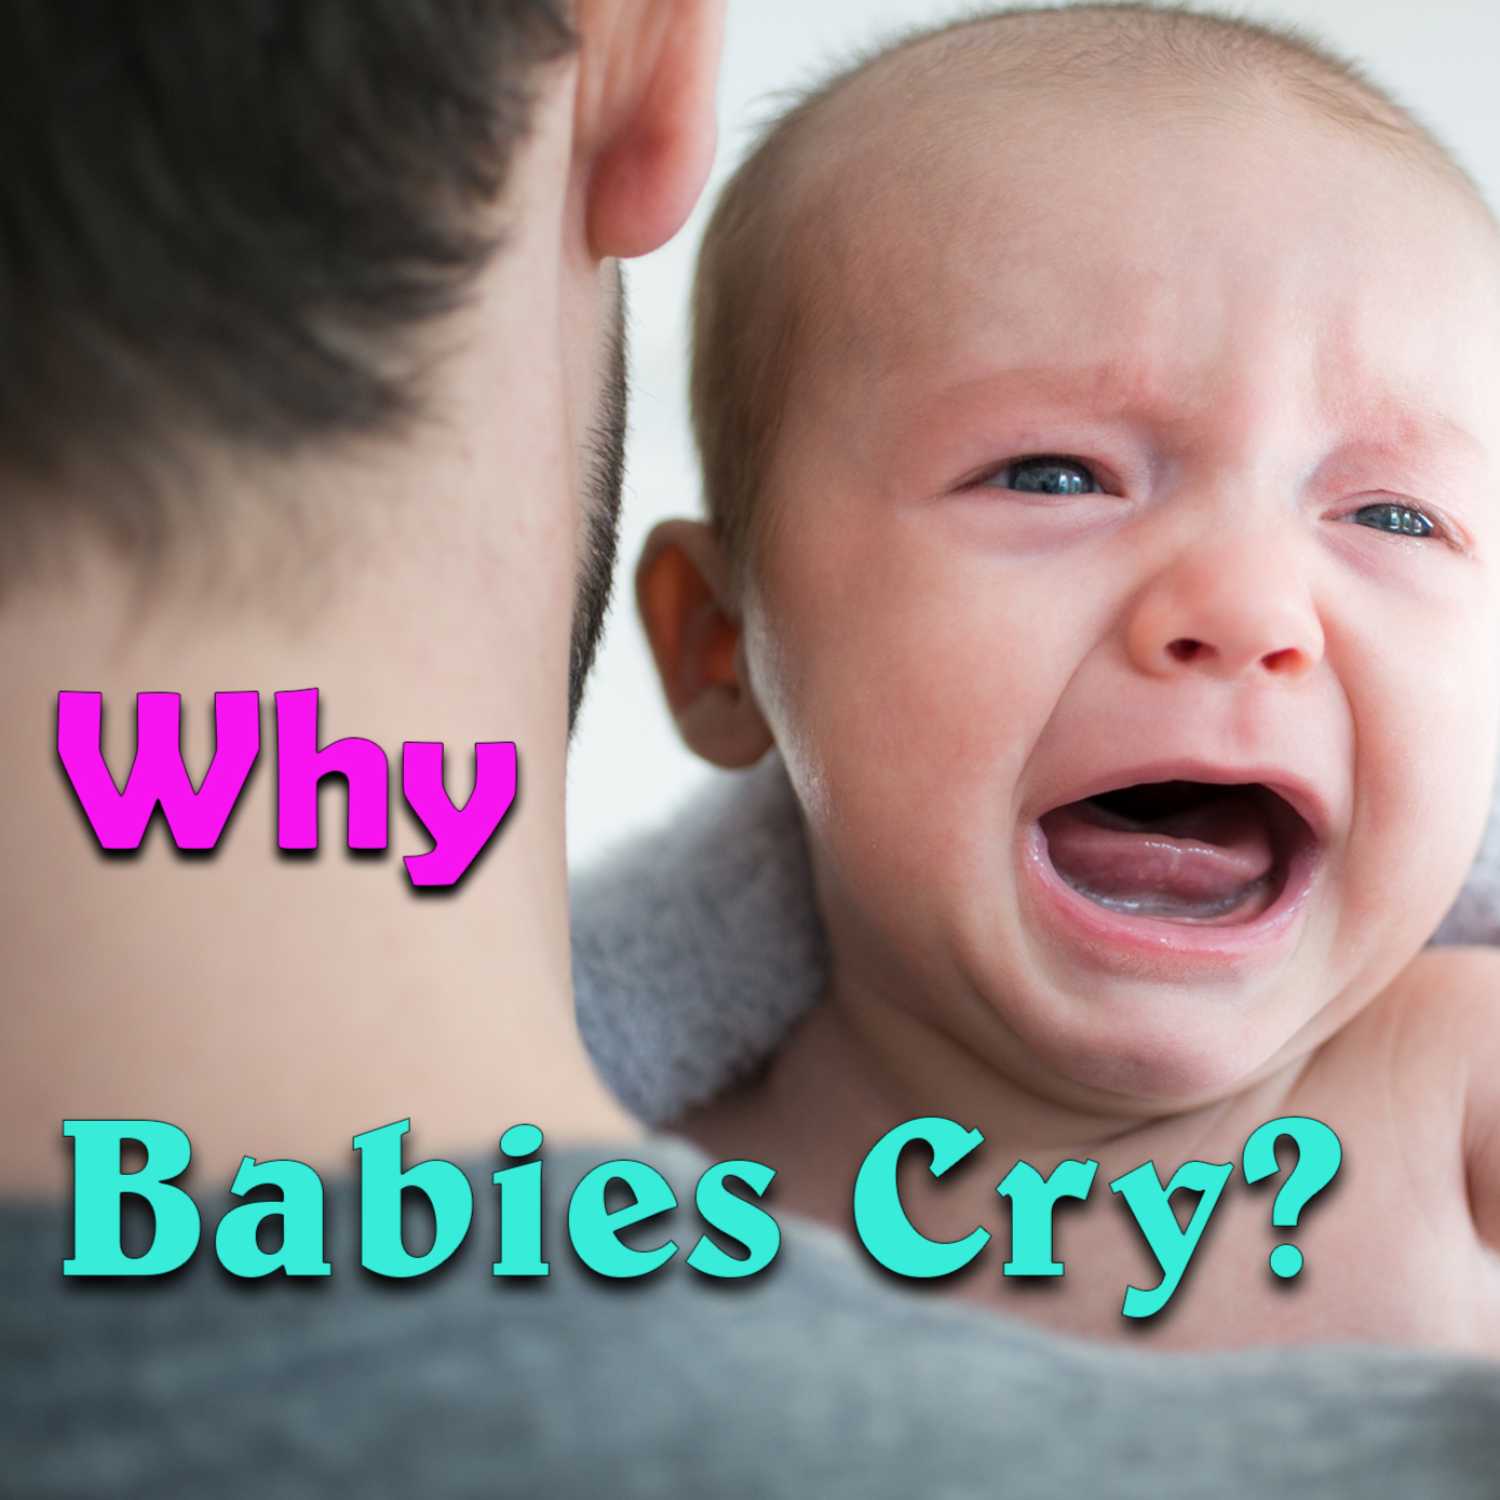 Why babies Cry?